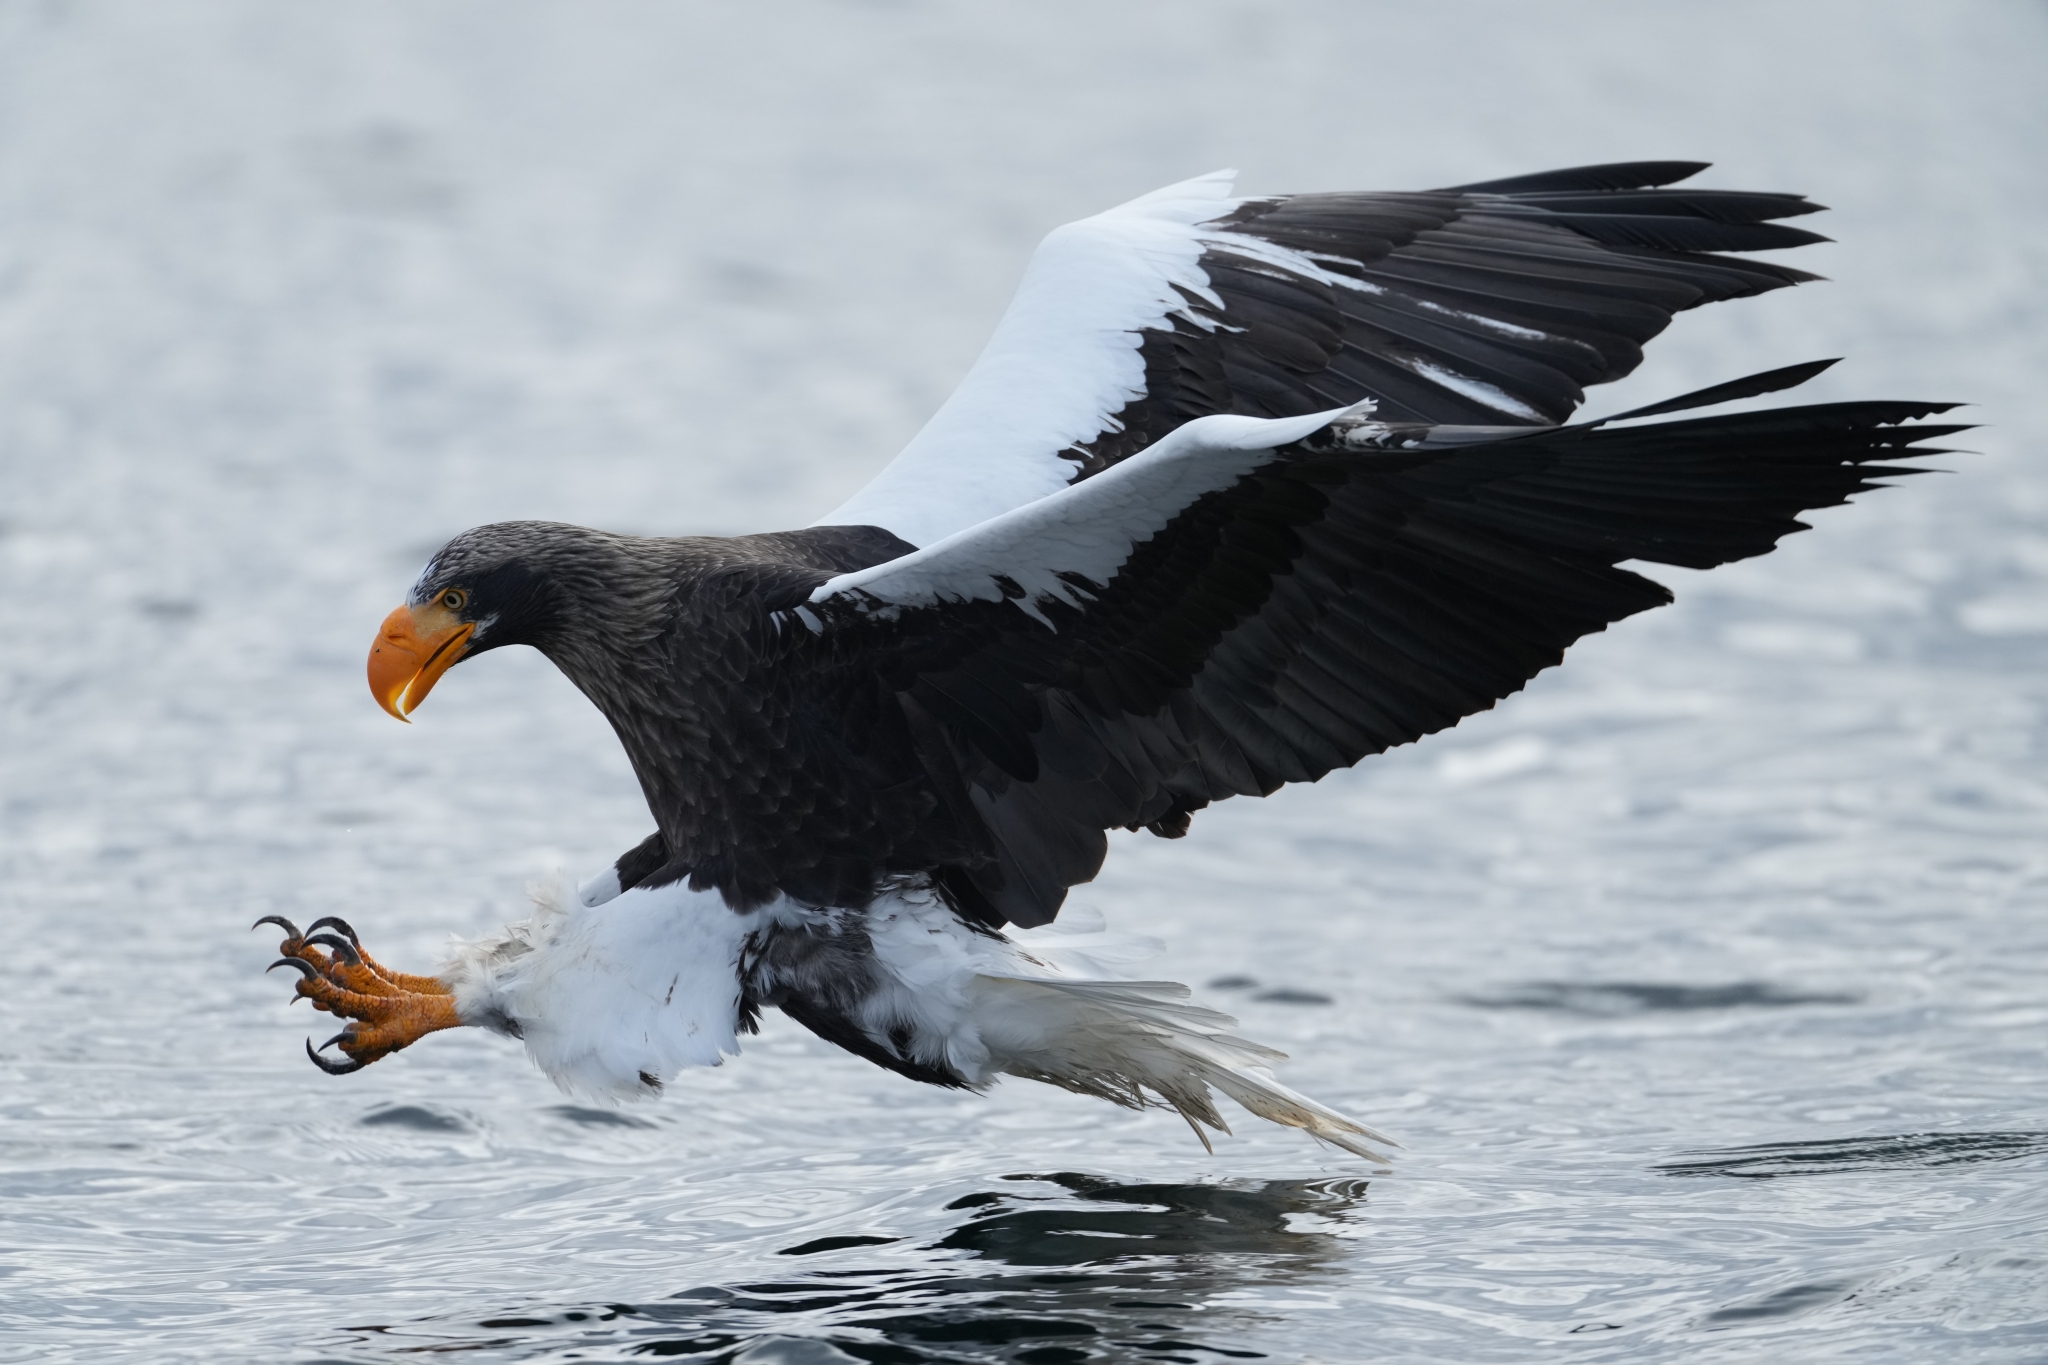 Eagle hunting above water, legs outstretched 